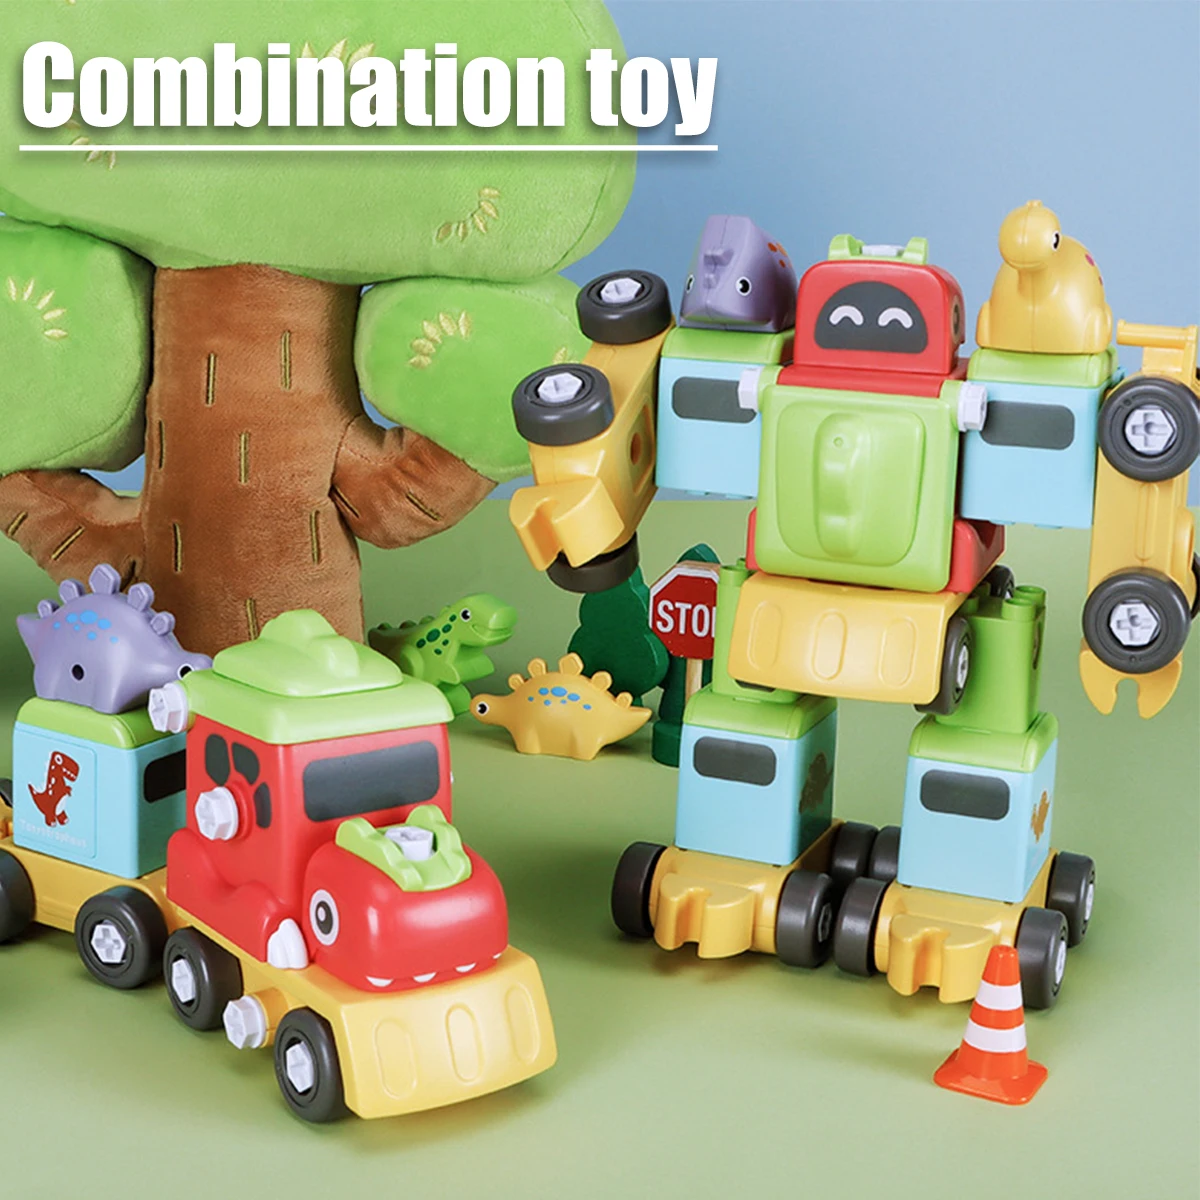 

Take Apart Stem Robot Train Toy 2-in-1 Train Robot Transformable Toy STEM Educative Dinosaur Train Robot Toy for Kids Age